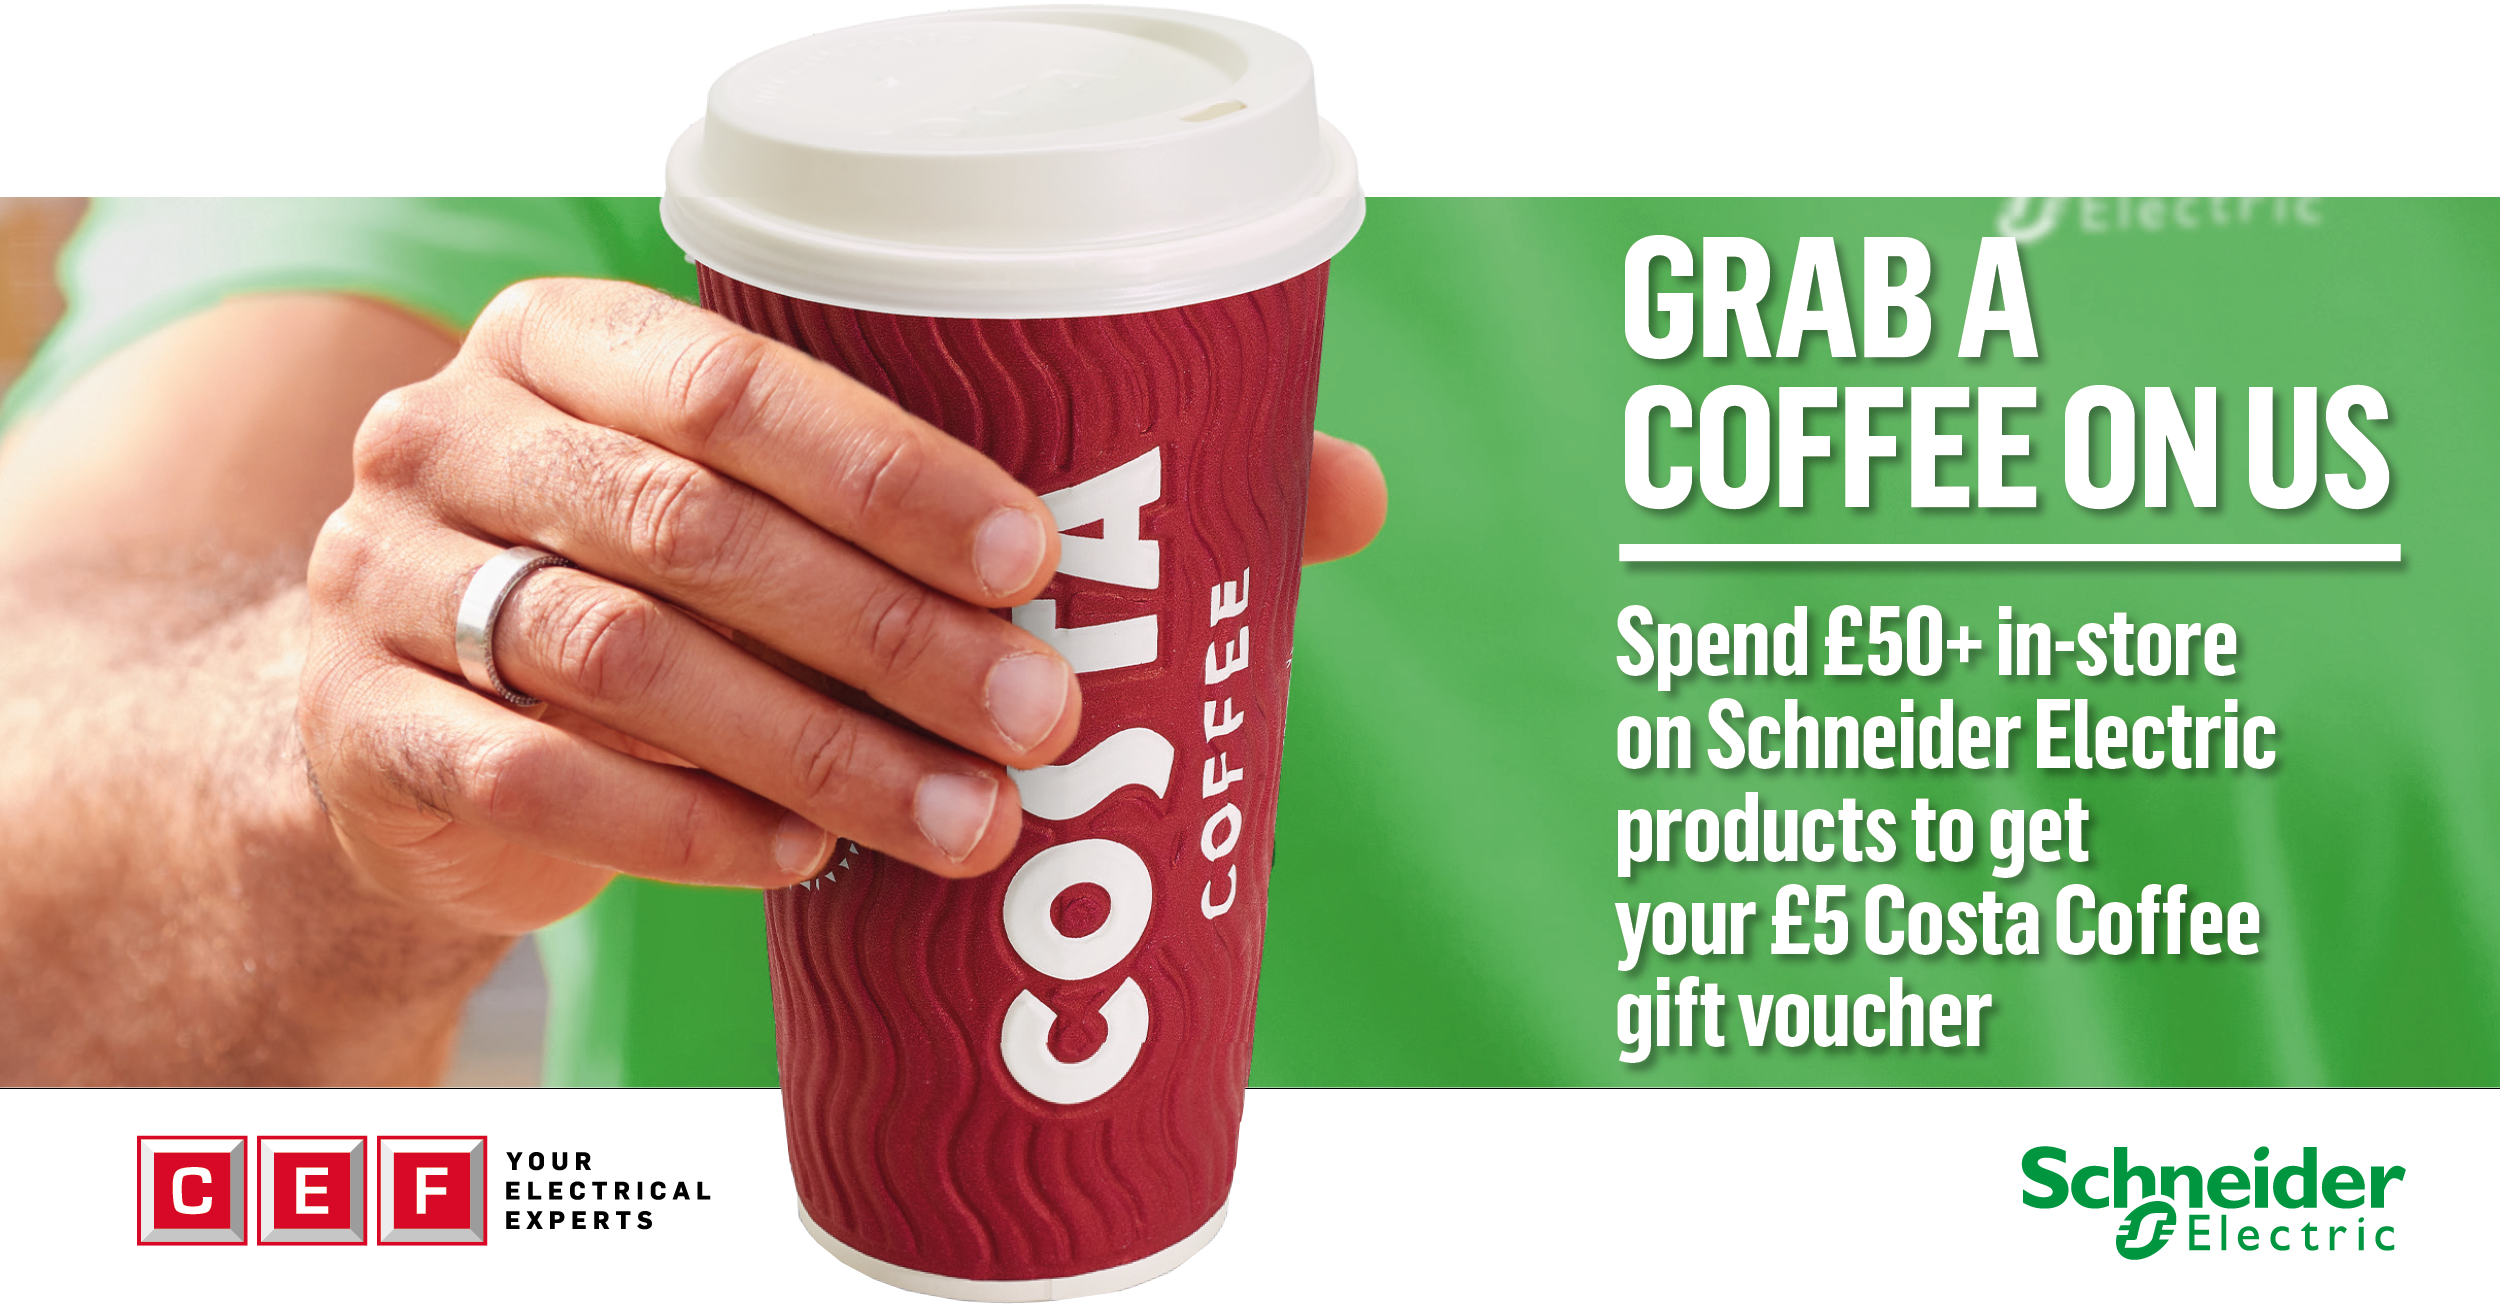 Grab a Costa coffee when you buy Schneider products in-store